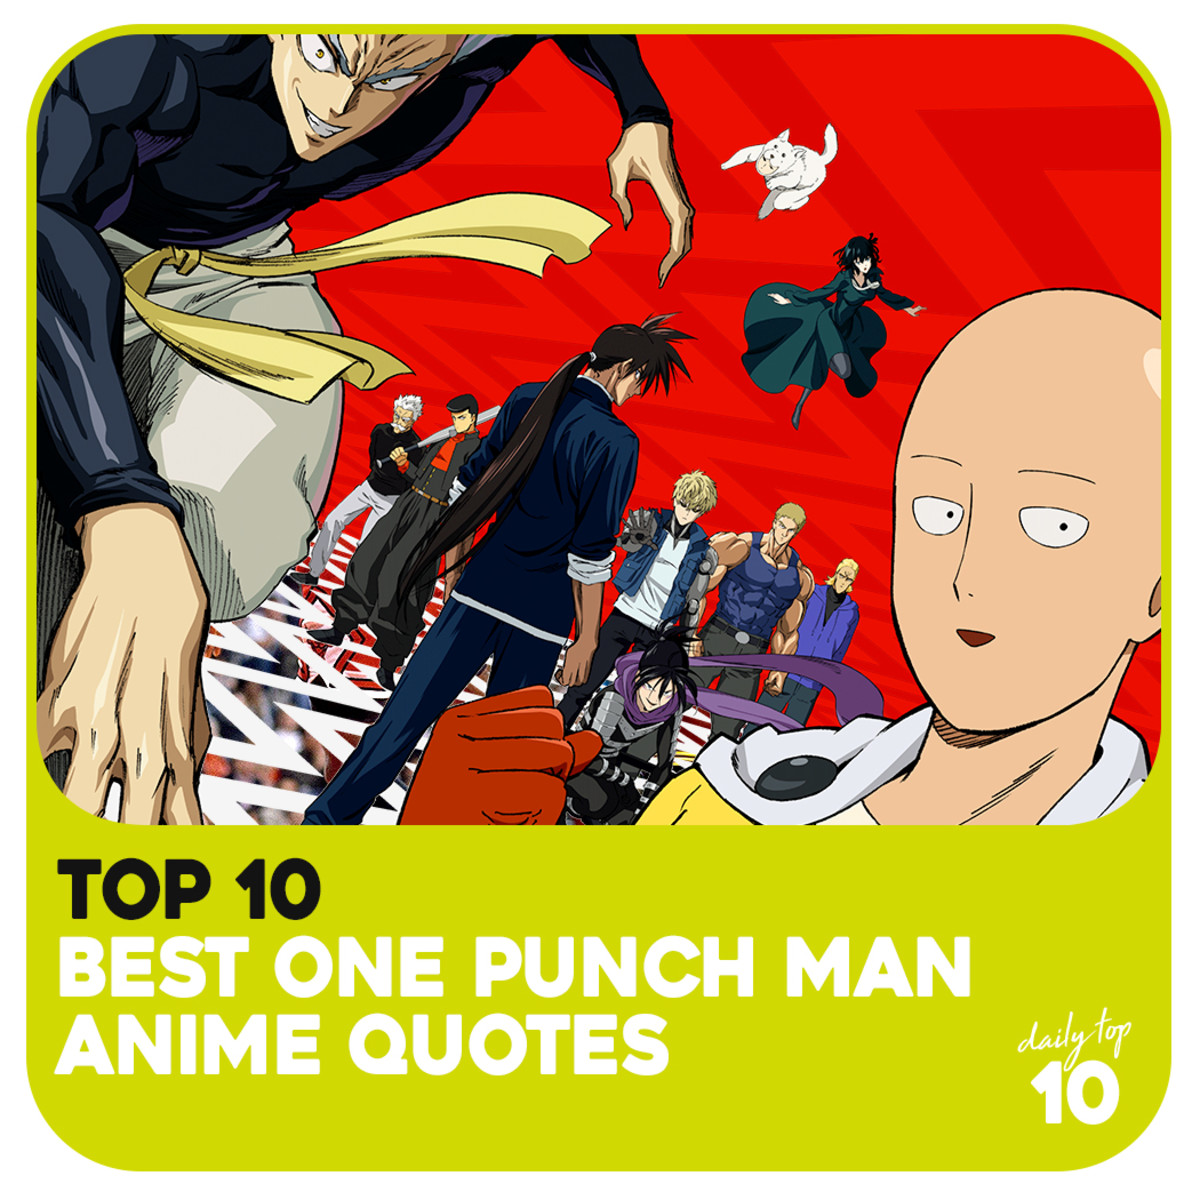 Top 10 Best One Punch Man Anime Quotes Featuring Saitama, Genos, Bang and More!